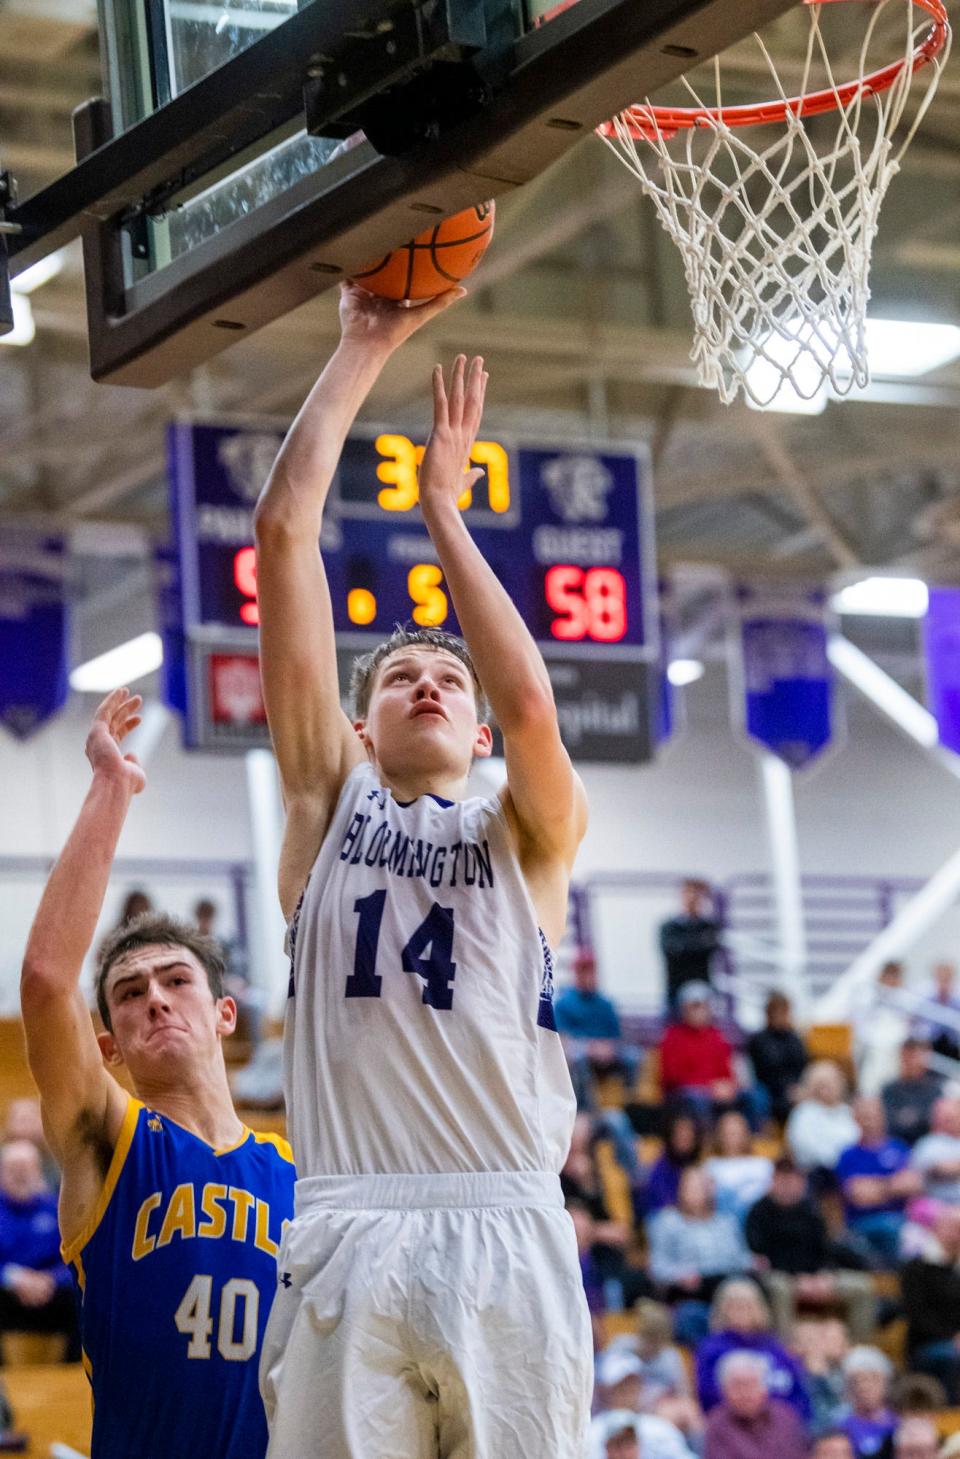 South's Gavin Wisely (14) scores in front of Castle's Weston Aigner (40) in overtime during the Bloomington South versus Castle boys basketball game at Bloomington High School South on Friday, Jan. 20, 2023.